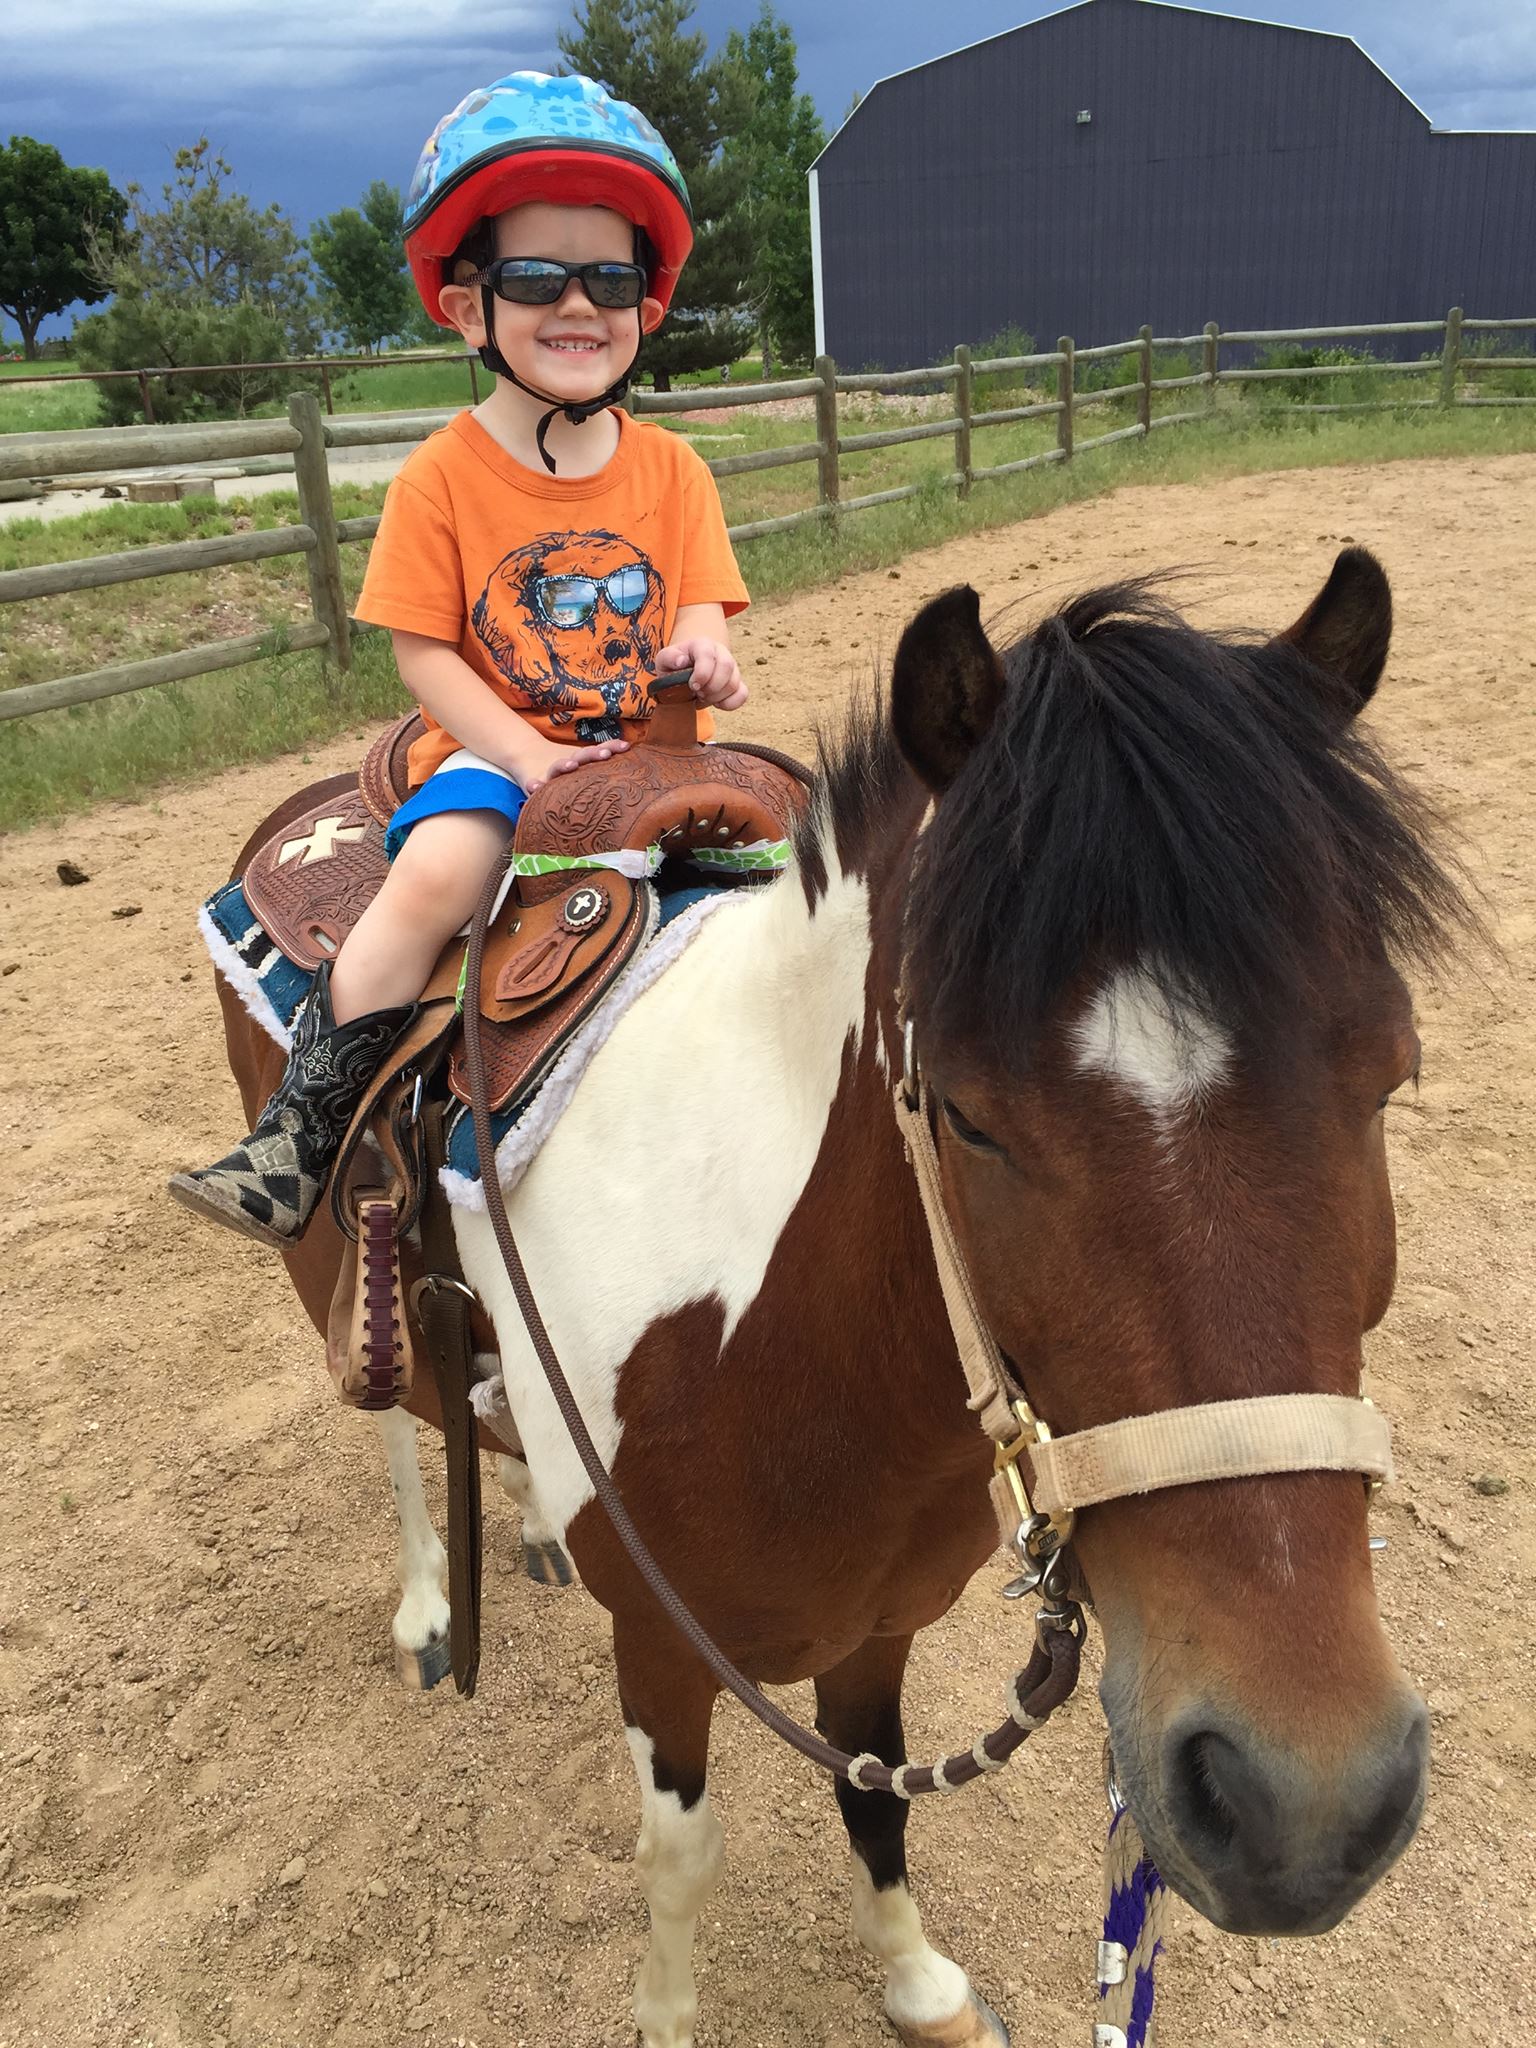 Young boy in helmet sitting on a brown and white pony